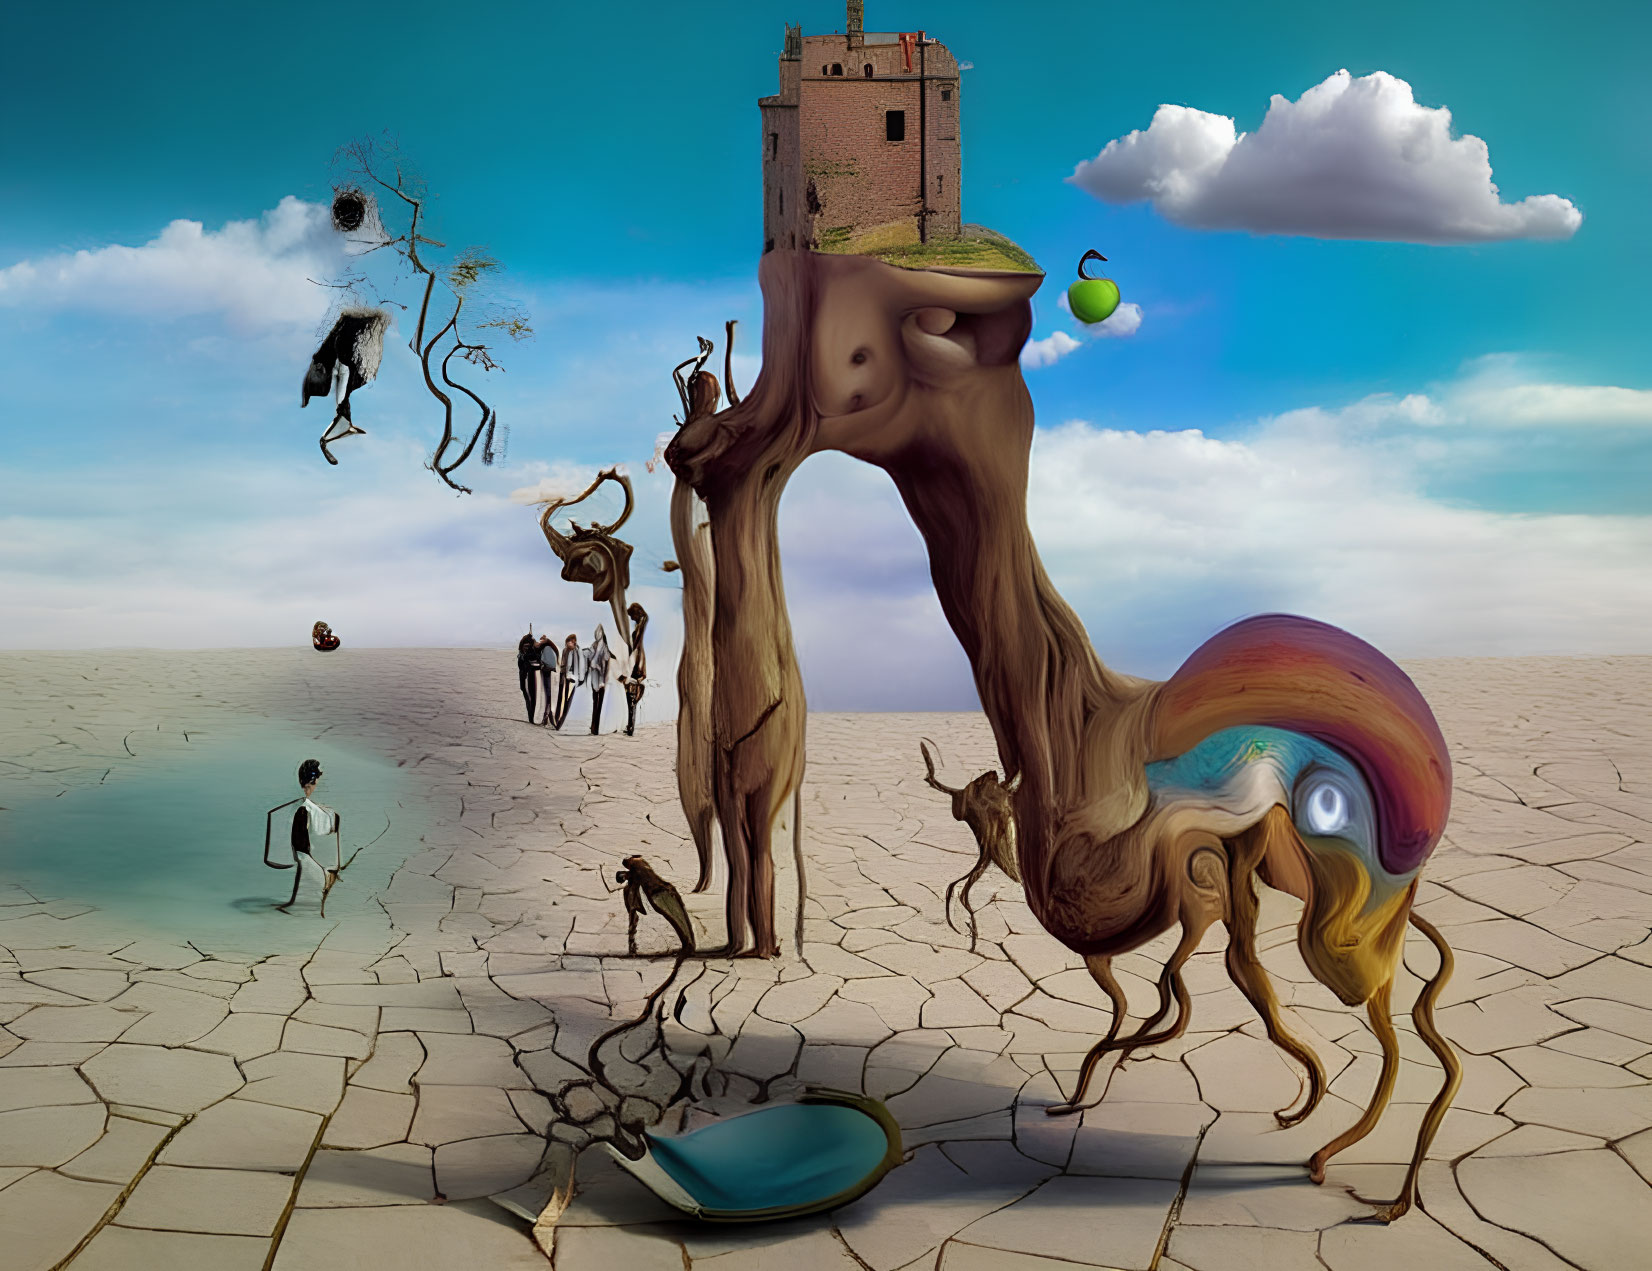 Surreal landscape with cracked desert, distorted creatures, floating objects, small figures, and solitary tower